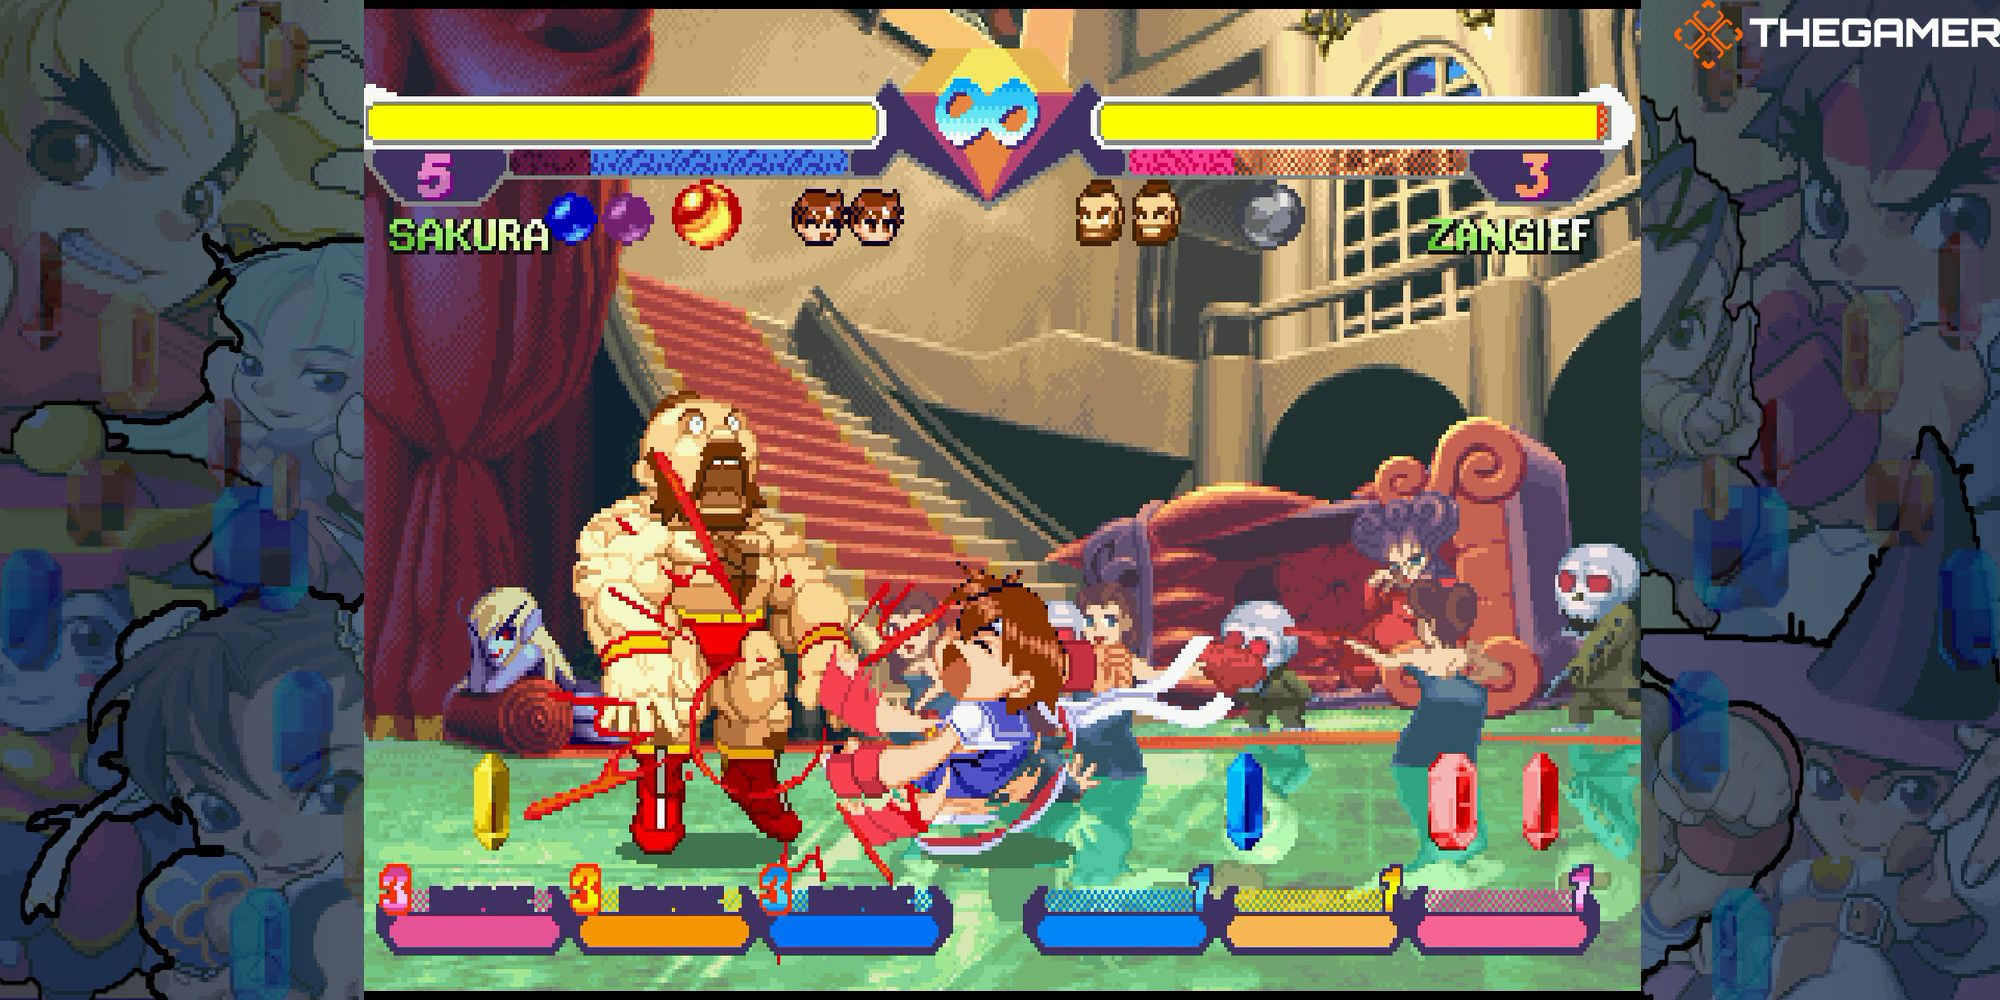 Sakura charges towards Zangief with hectic hand chops in a battle at Demitri's Moving Mansion. Pocket Fighter.